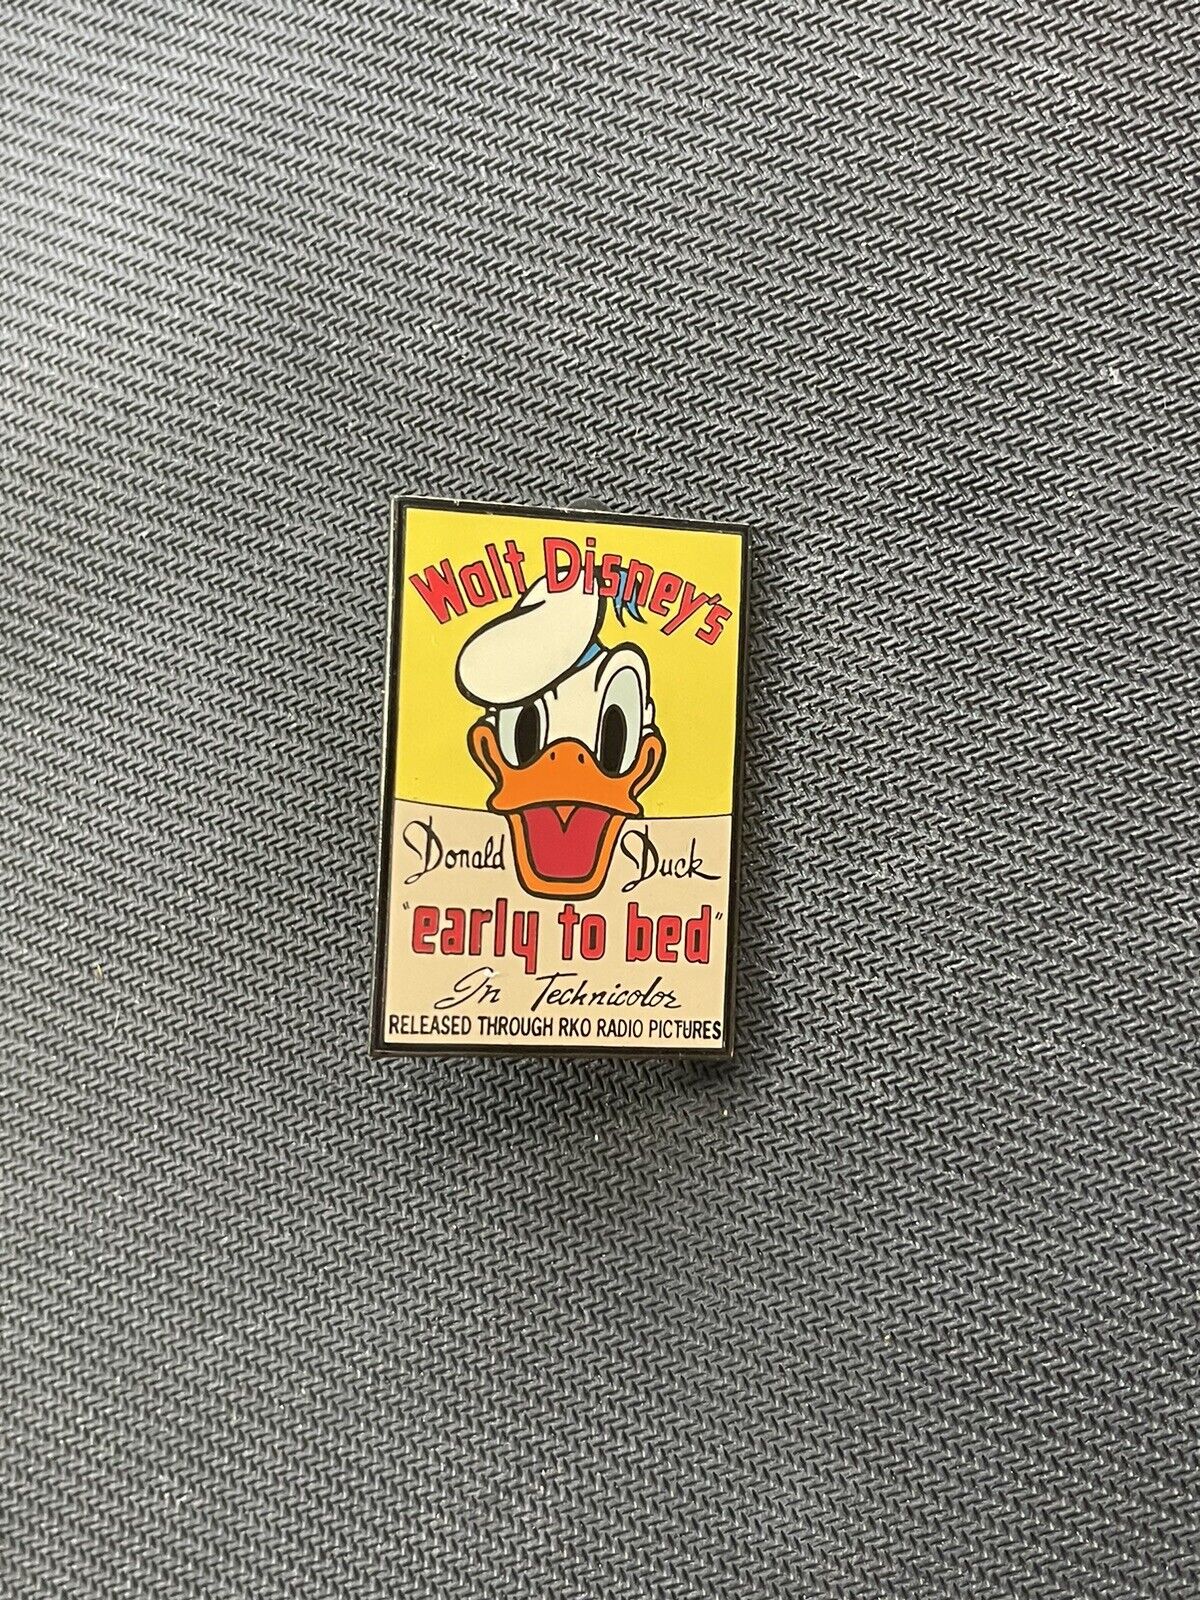 Disney Pin Auction Rare Vintage Series Donald Duck Early To Bed LE 100